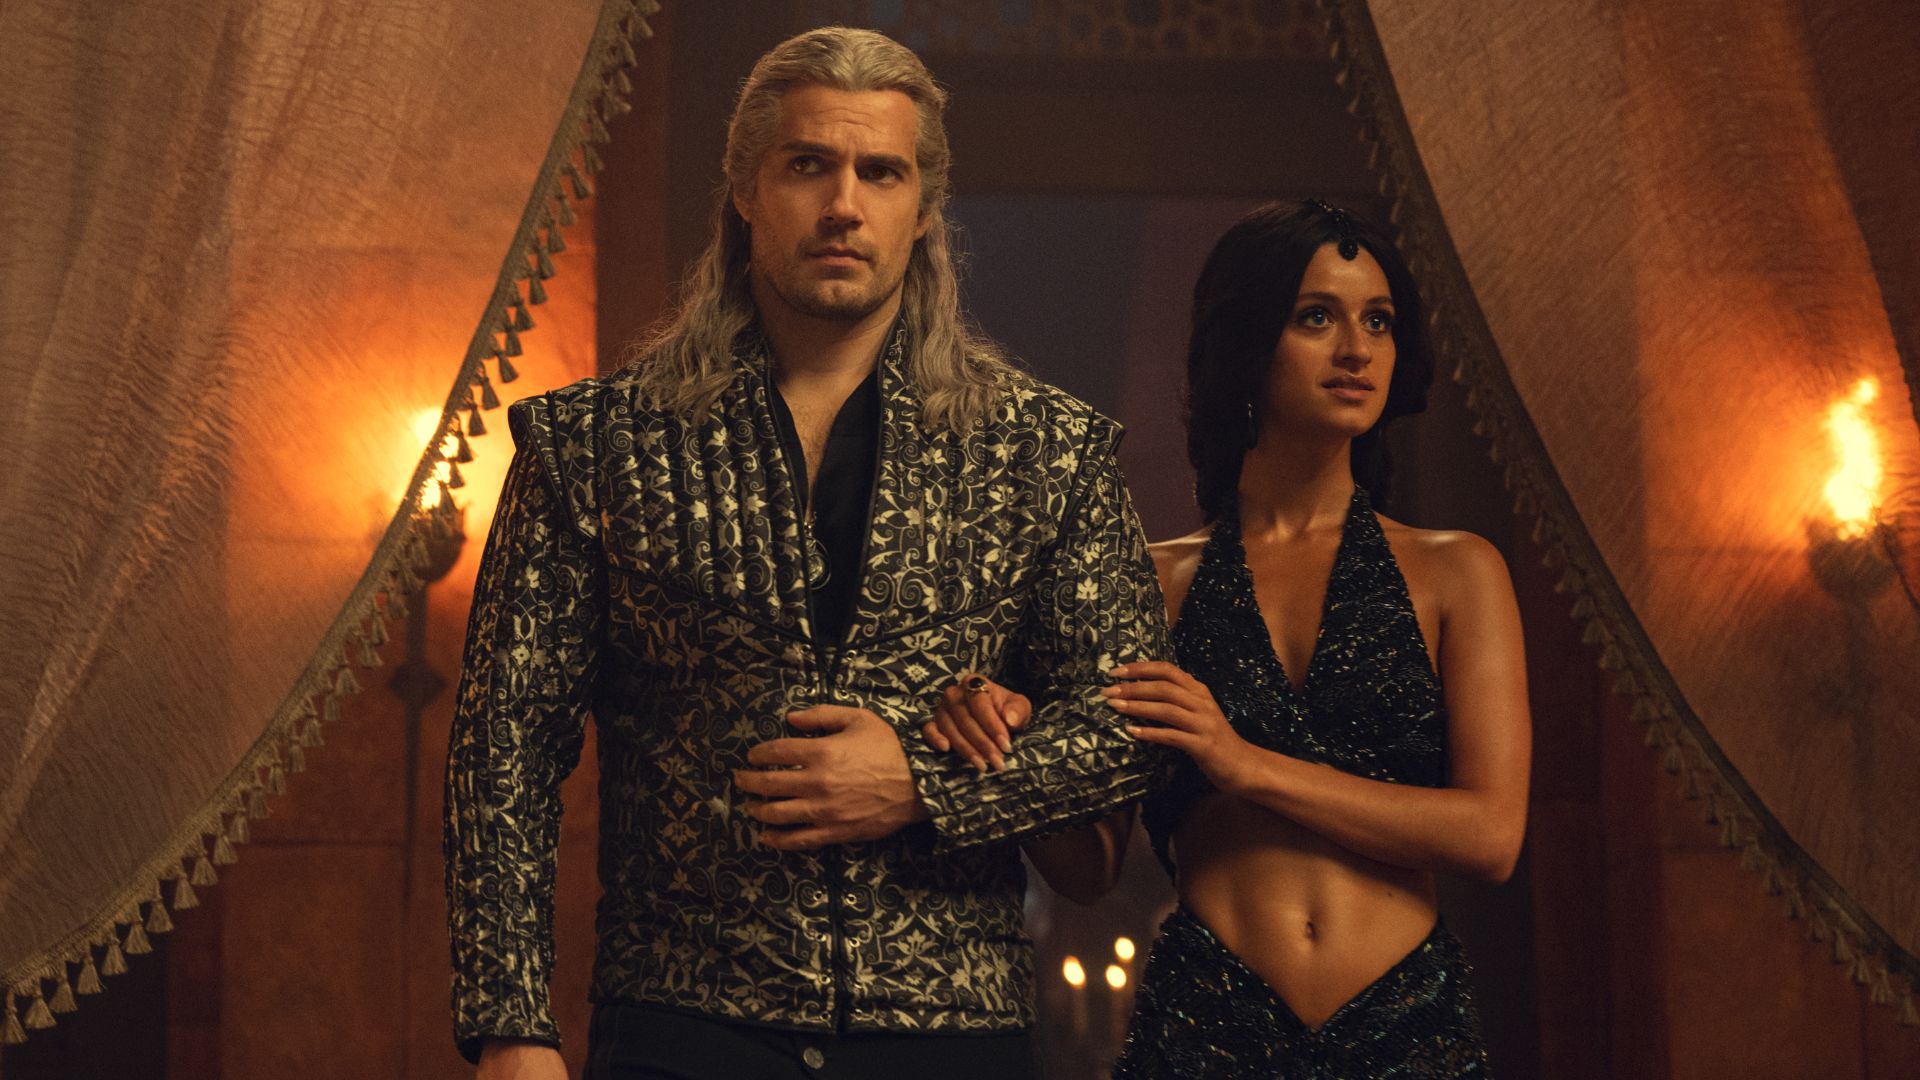 Henry Cavill & 'The Witcher' Cast on Bringing the Books to Life on Netflix  (VIDEO)